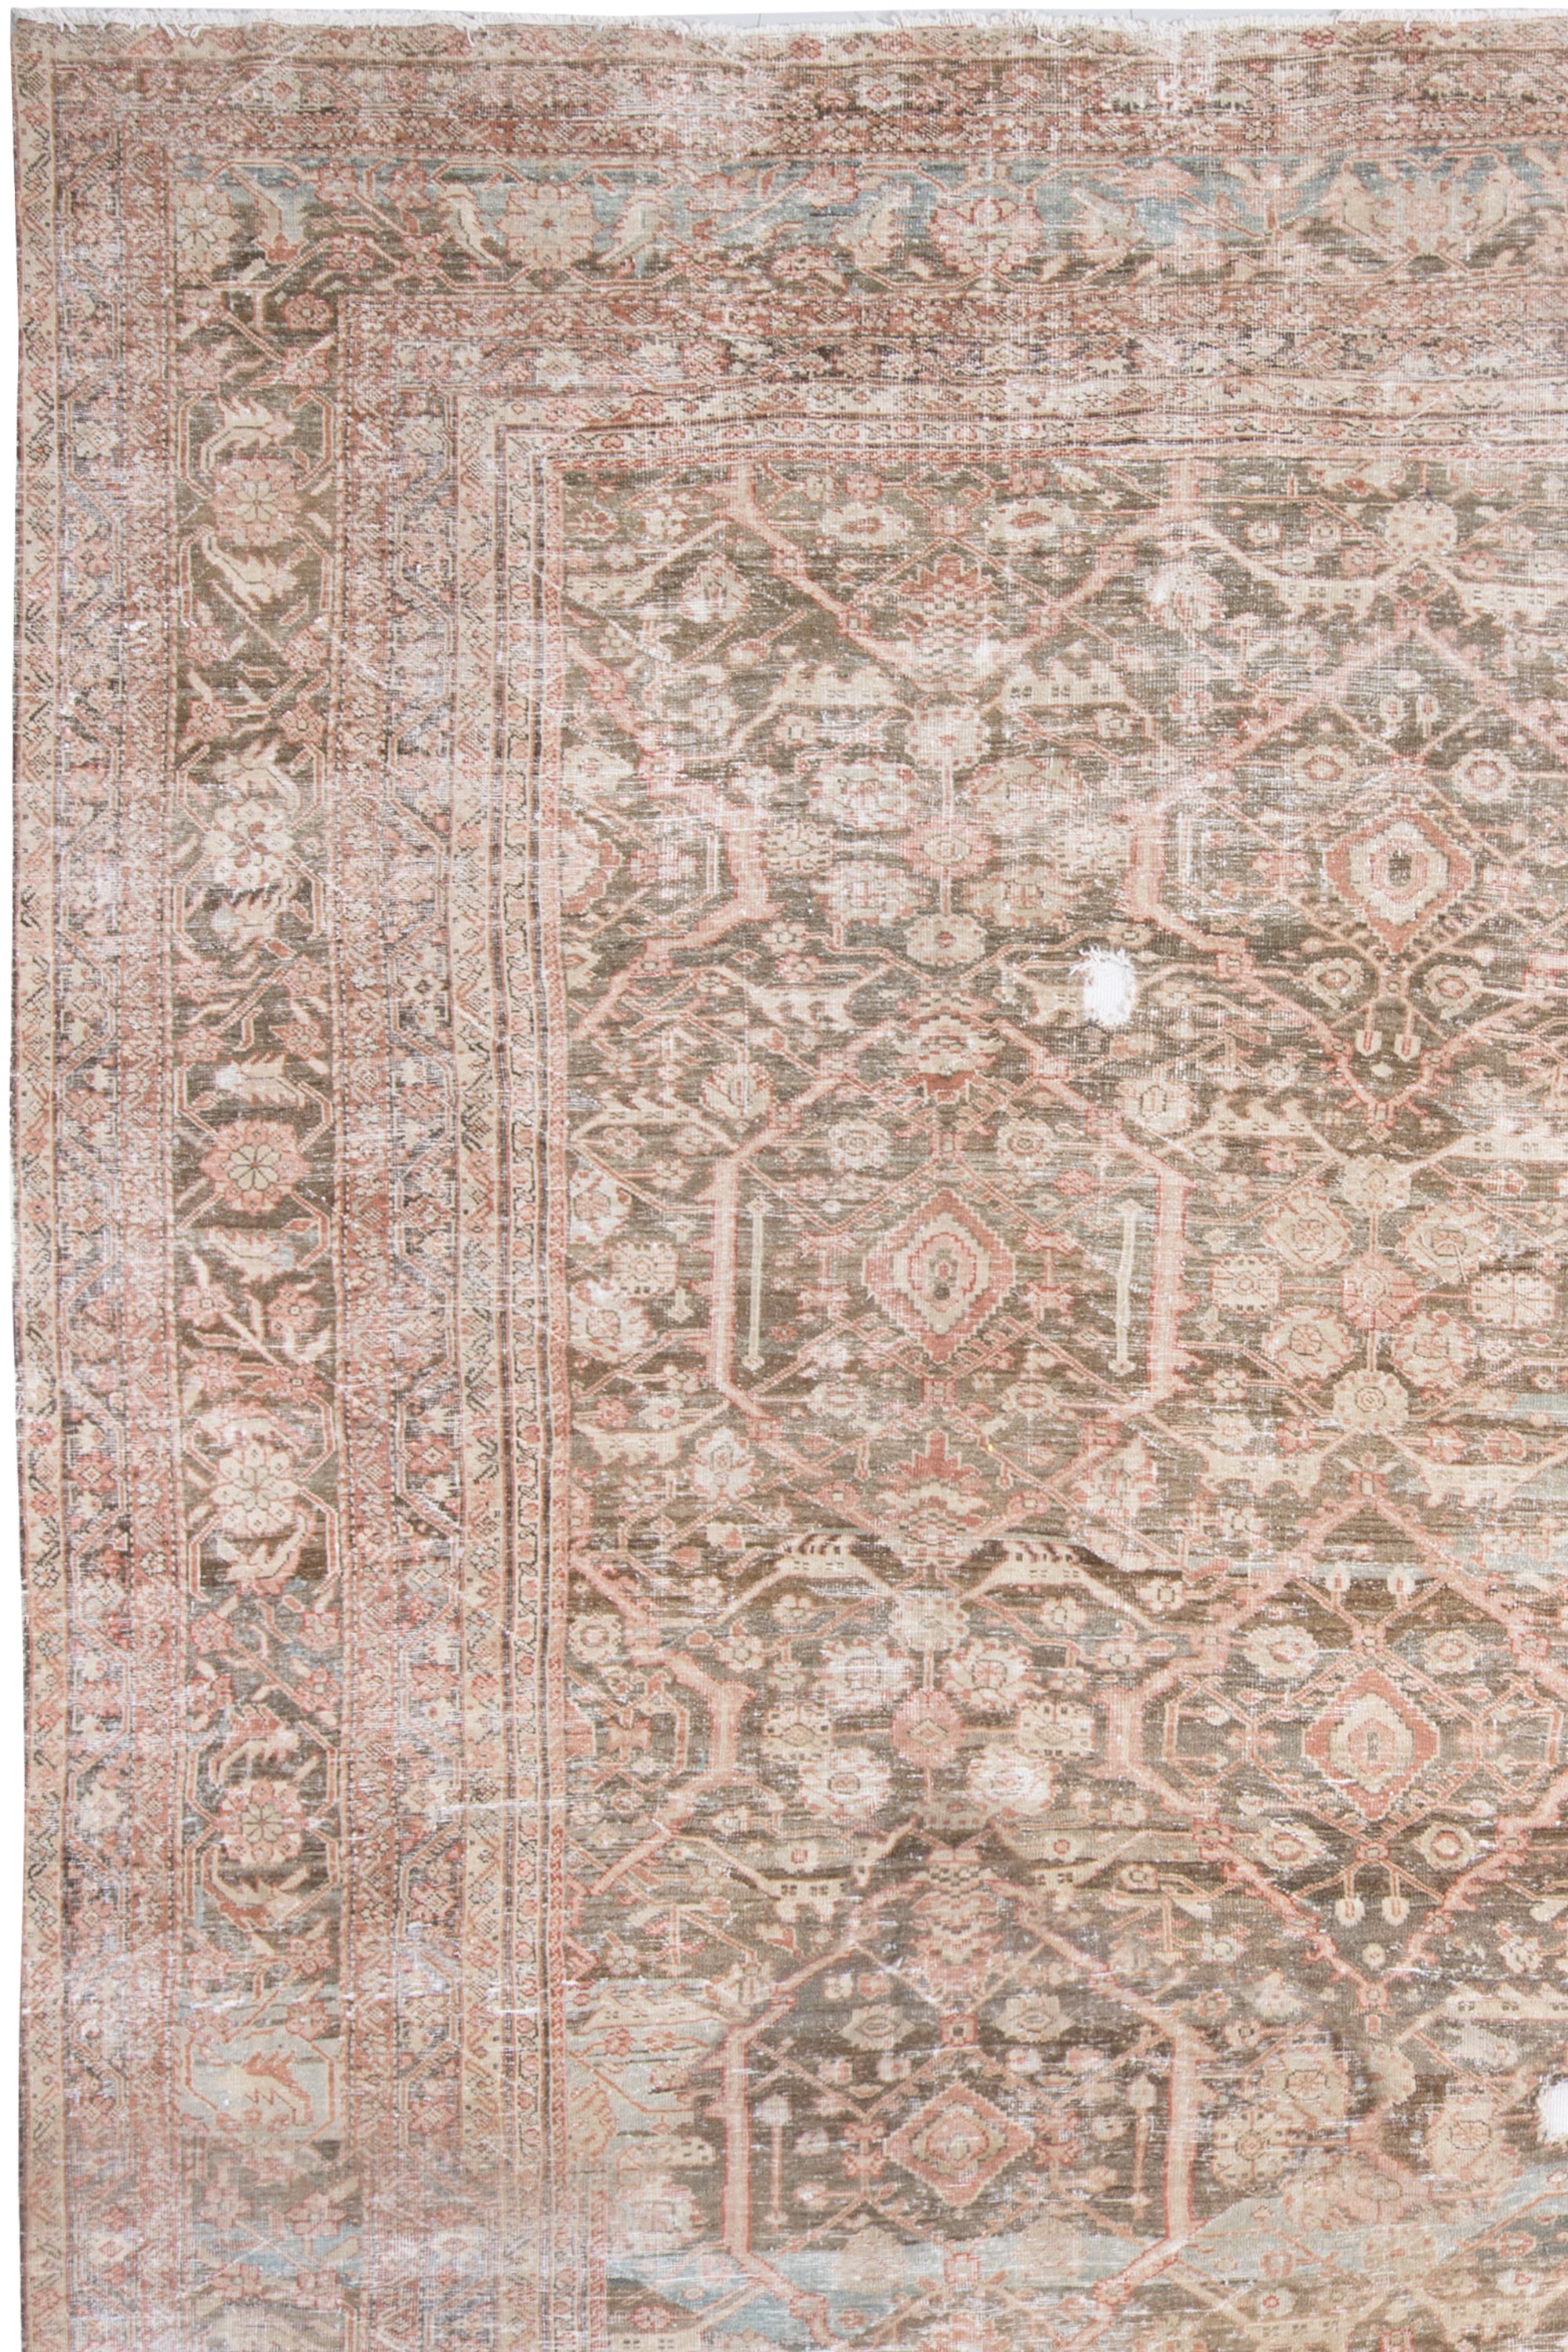 SULTANABAD RUG, AR31037, WEST PERSIA, 14' X 19' - thumbnail 2